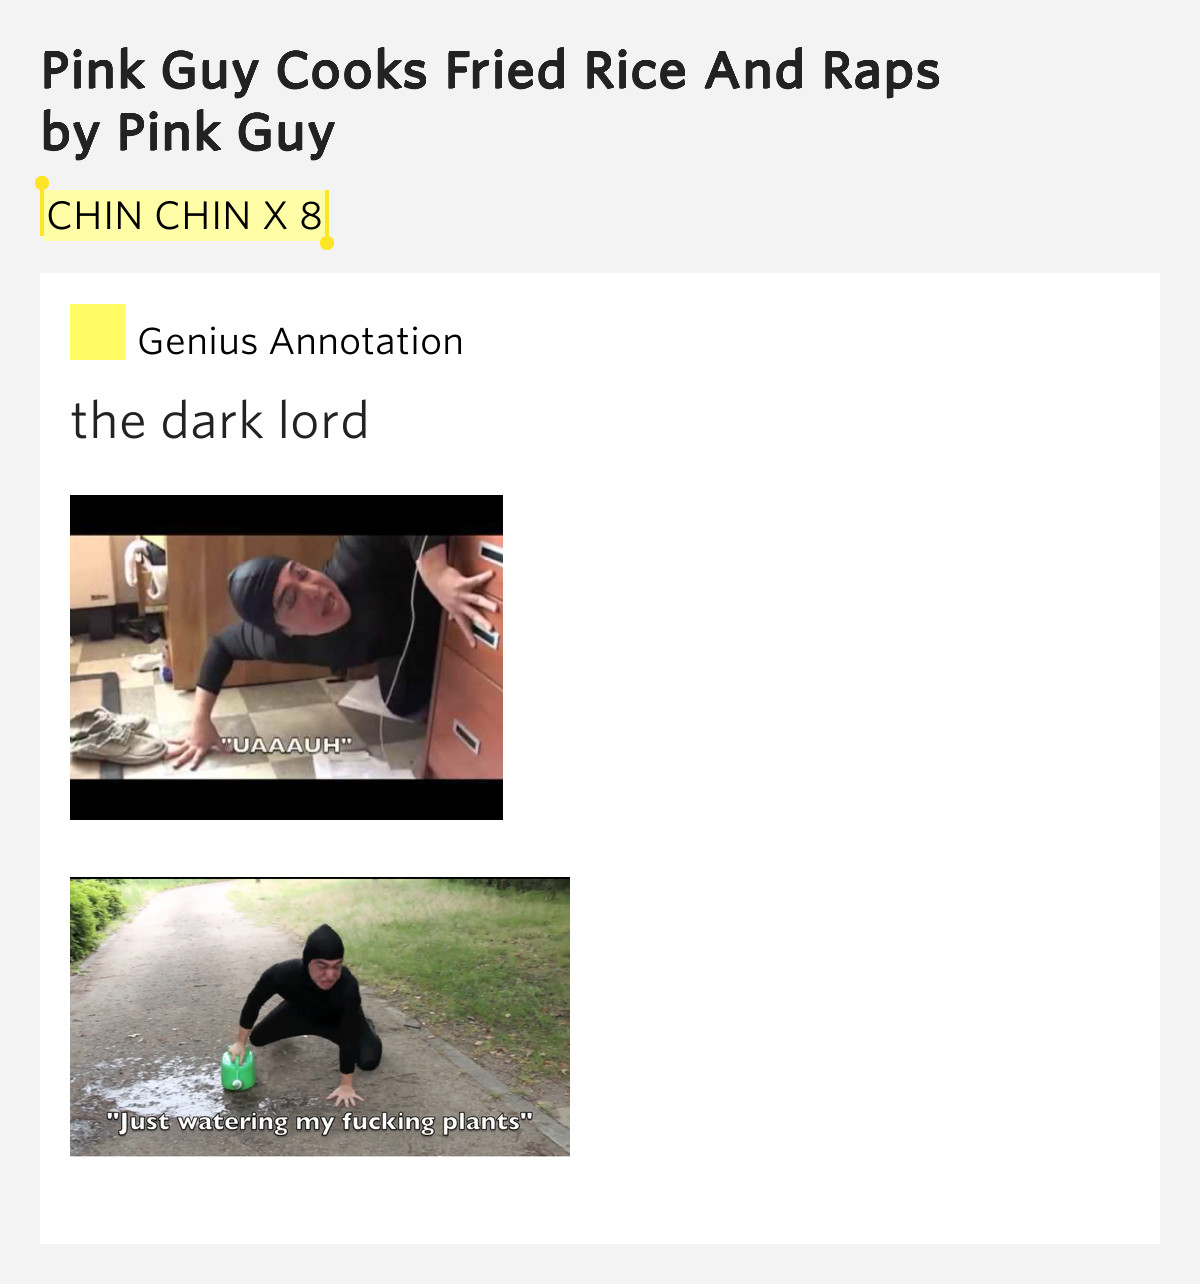 Fried Rice Lyrics
 CHIN CHIN X 8 – Pink Guy Cooks Fried Rice And Raps by Pink Guy